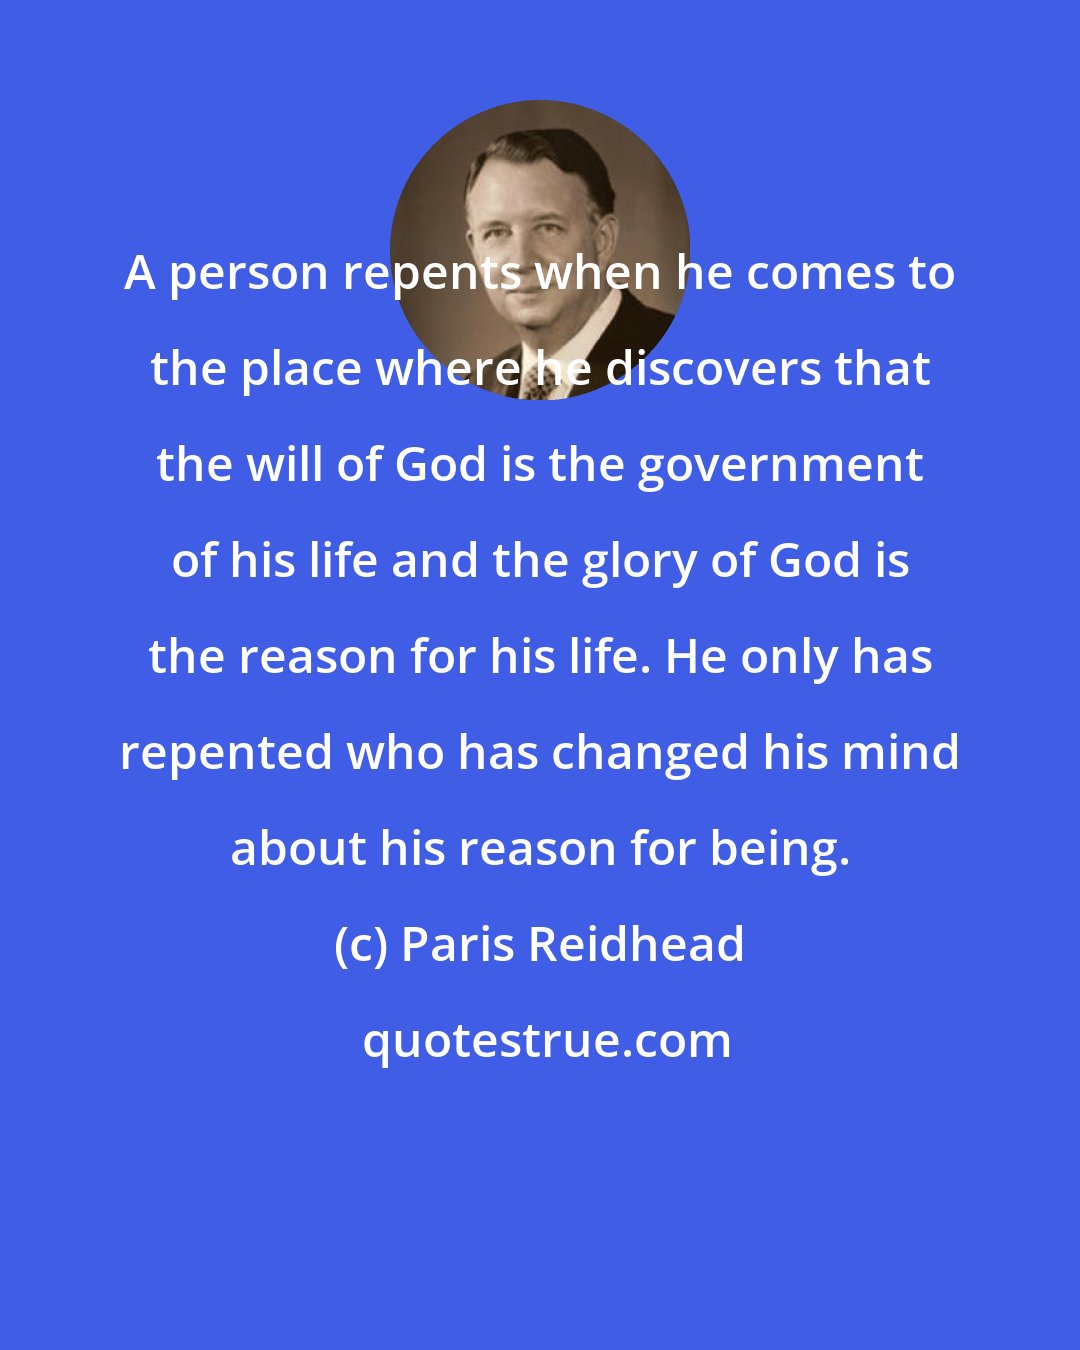 Paris Reidhead: A person repents when he comes to the place where he discovers that the will of God is the government of his life and the glory of God is the reason for his life. He only has repented who has changed his mind about his reason for being.